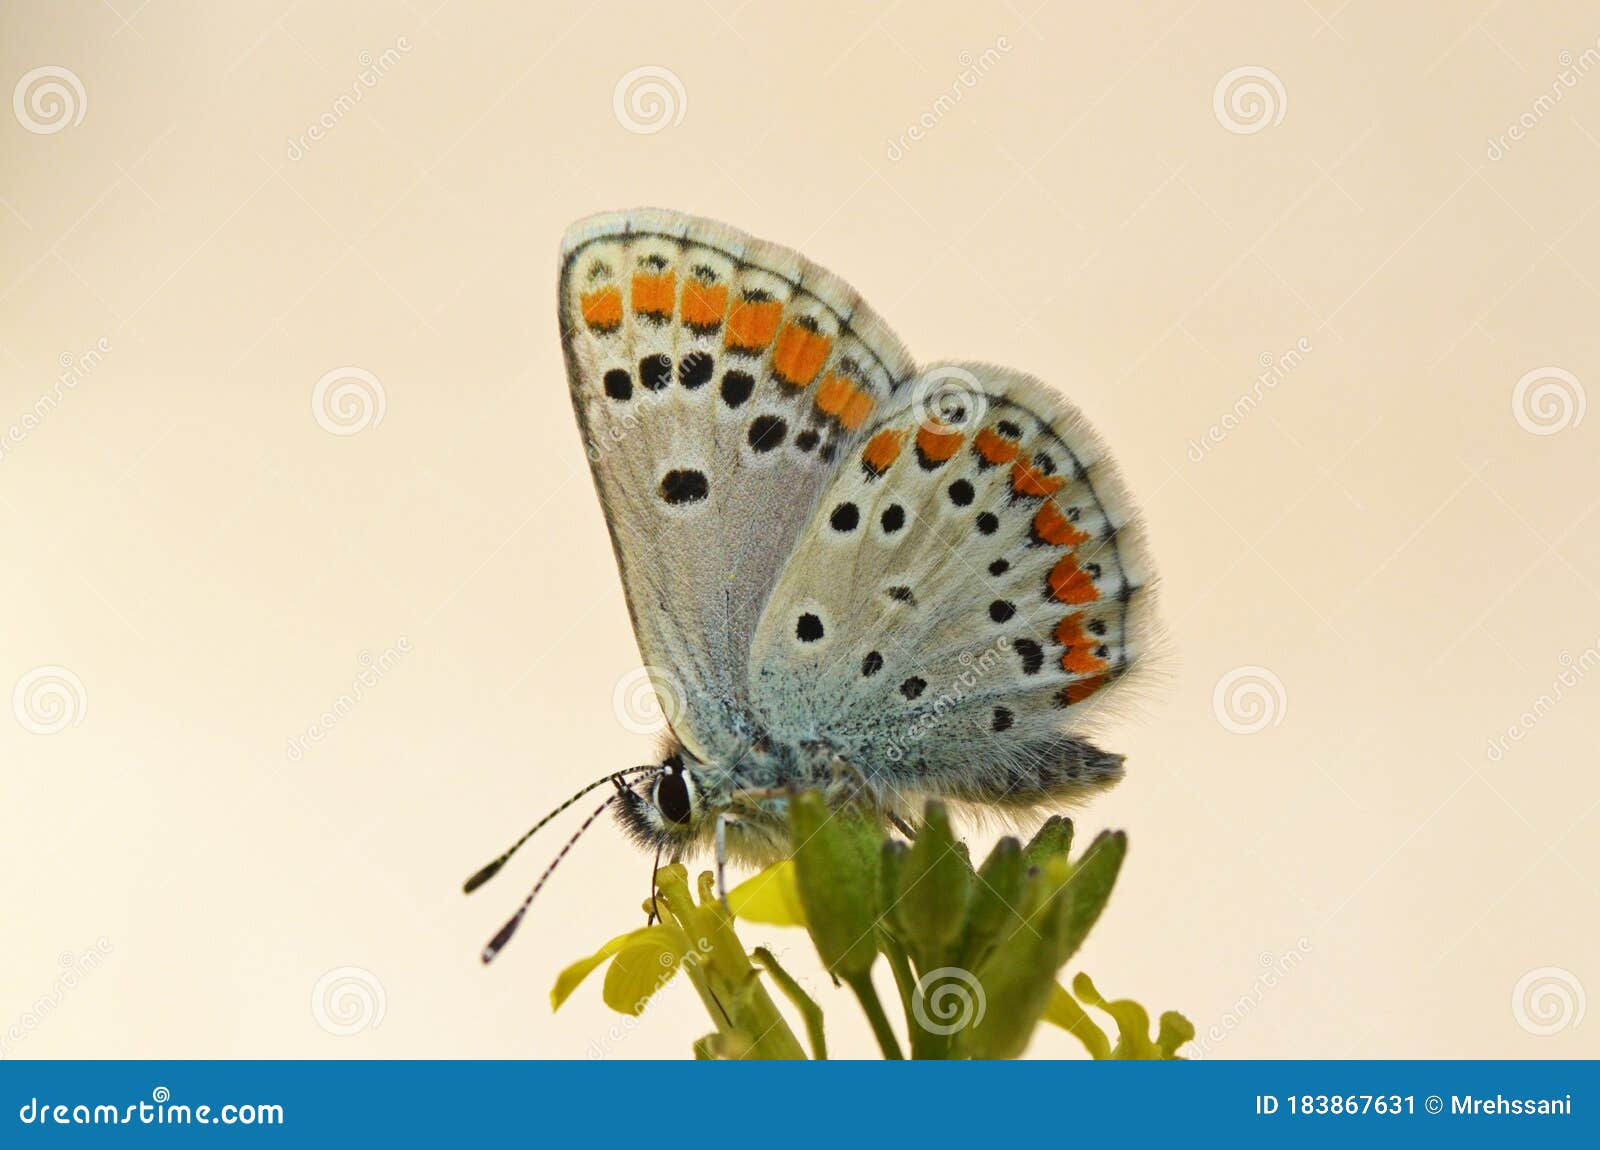 aricia agestis , the brown argus butterfly on flower